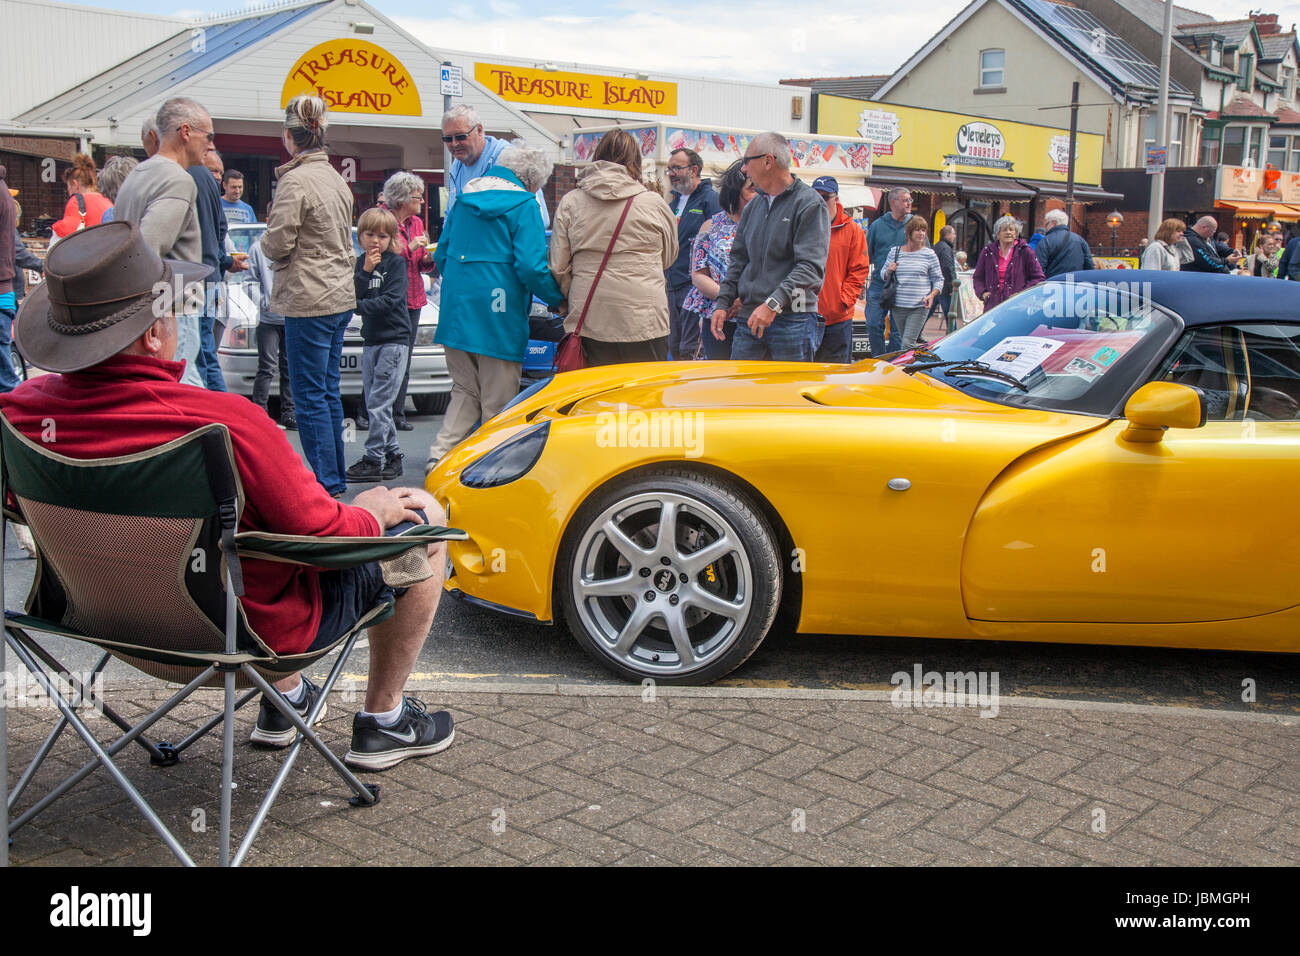 2003 Yellow TVR Tamora at the Cleveleys Car Show is a yearly event which is staged along Victoria Road West and the Sea front Promenade in Cleveleys Town Centre. Stock Photo